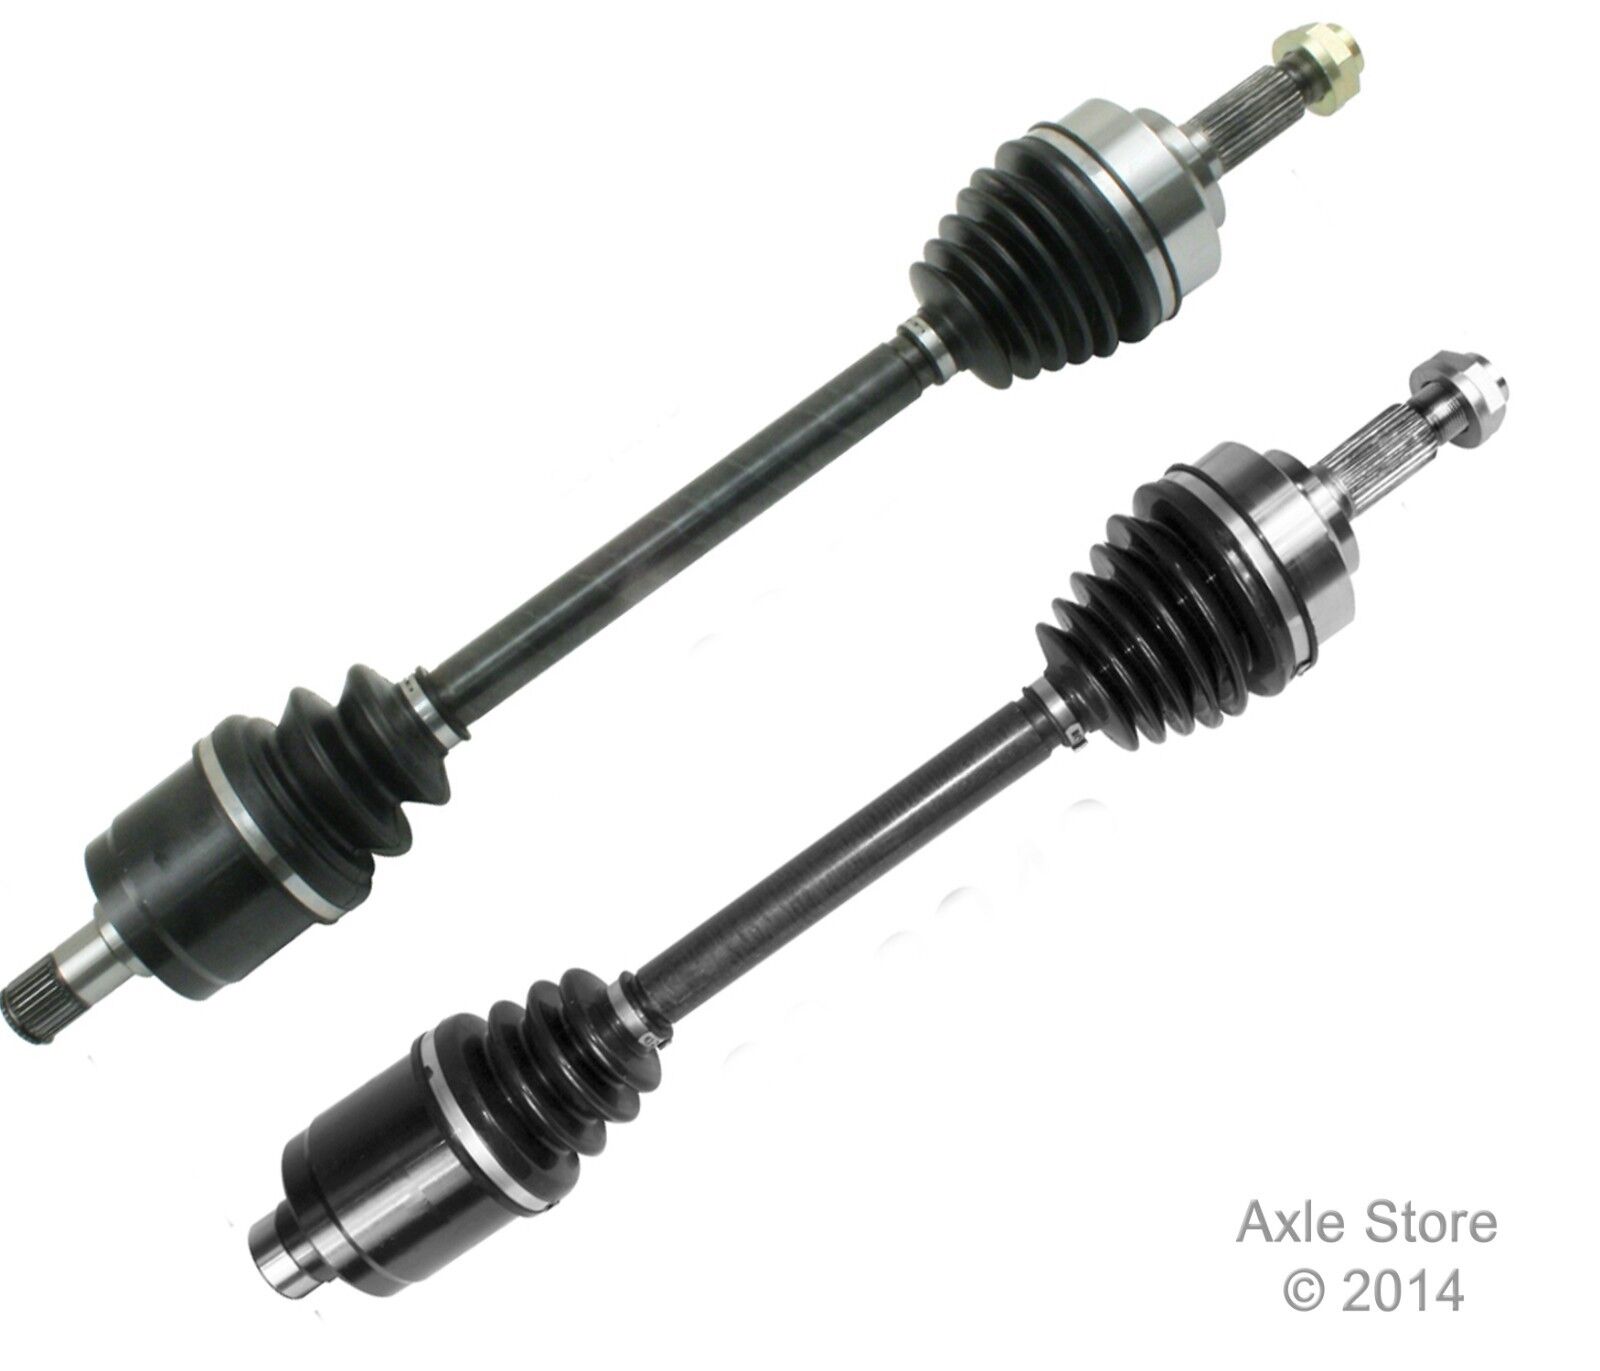 2 New Front Axles Fit 2007 2008 Acura TL With Automatic Transmission Only